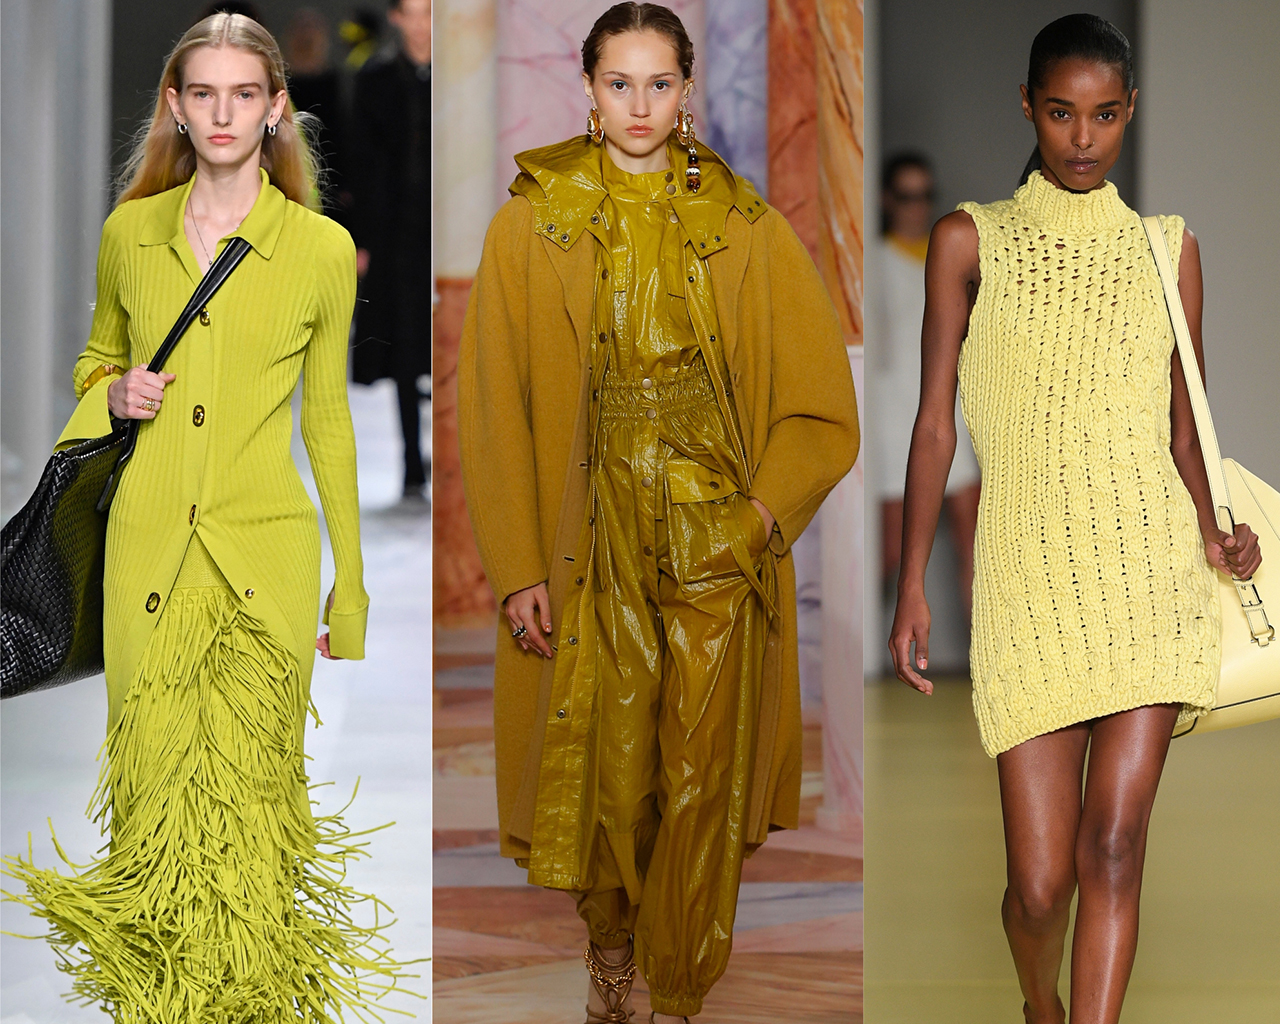 Chartreuse on the runway